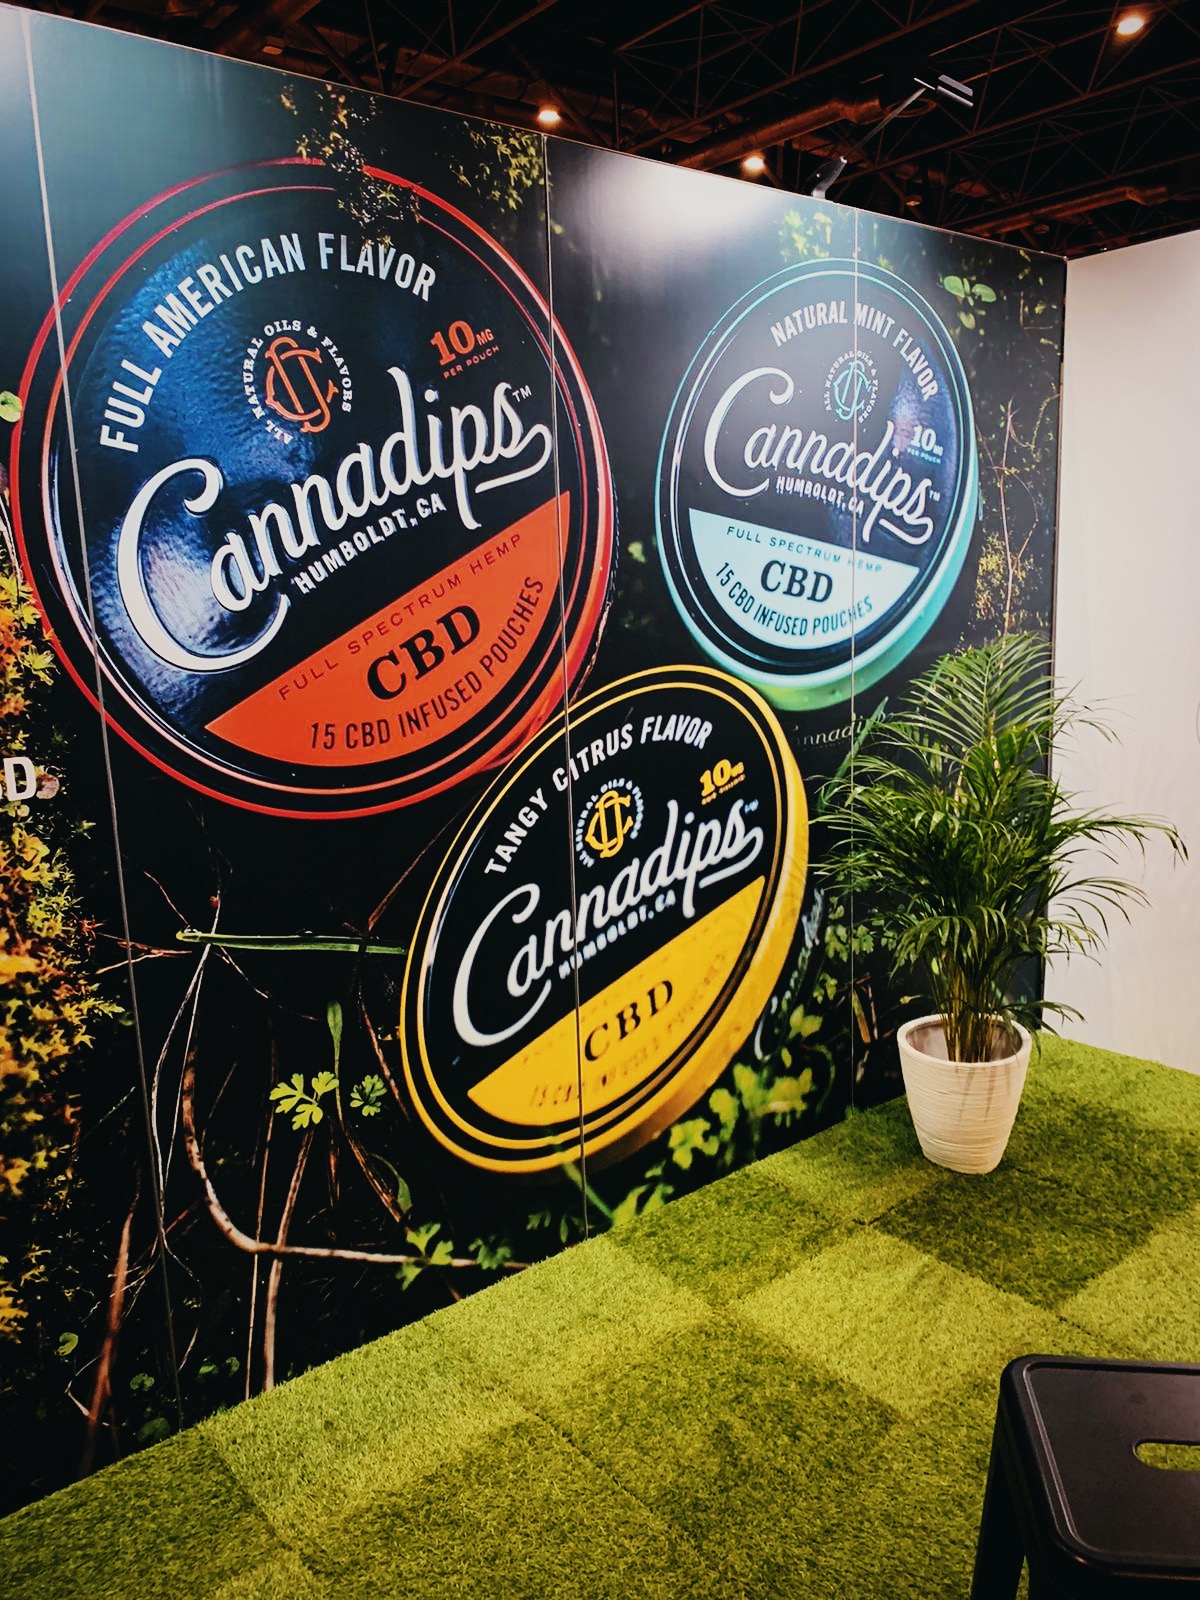 A close up look at the 3 Cannadips CBD flavours showcased at The National Health Fair.